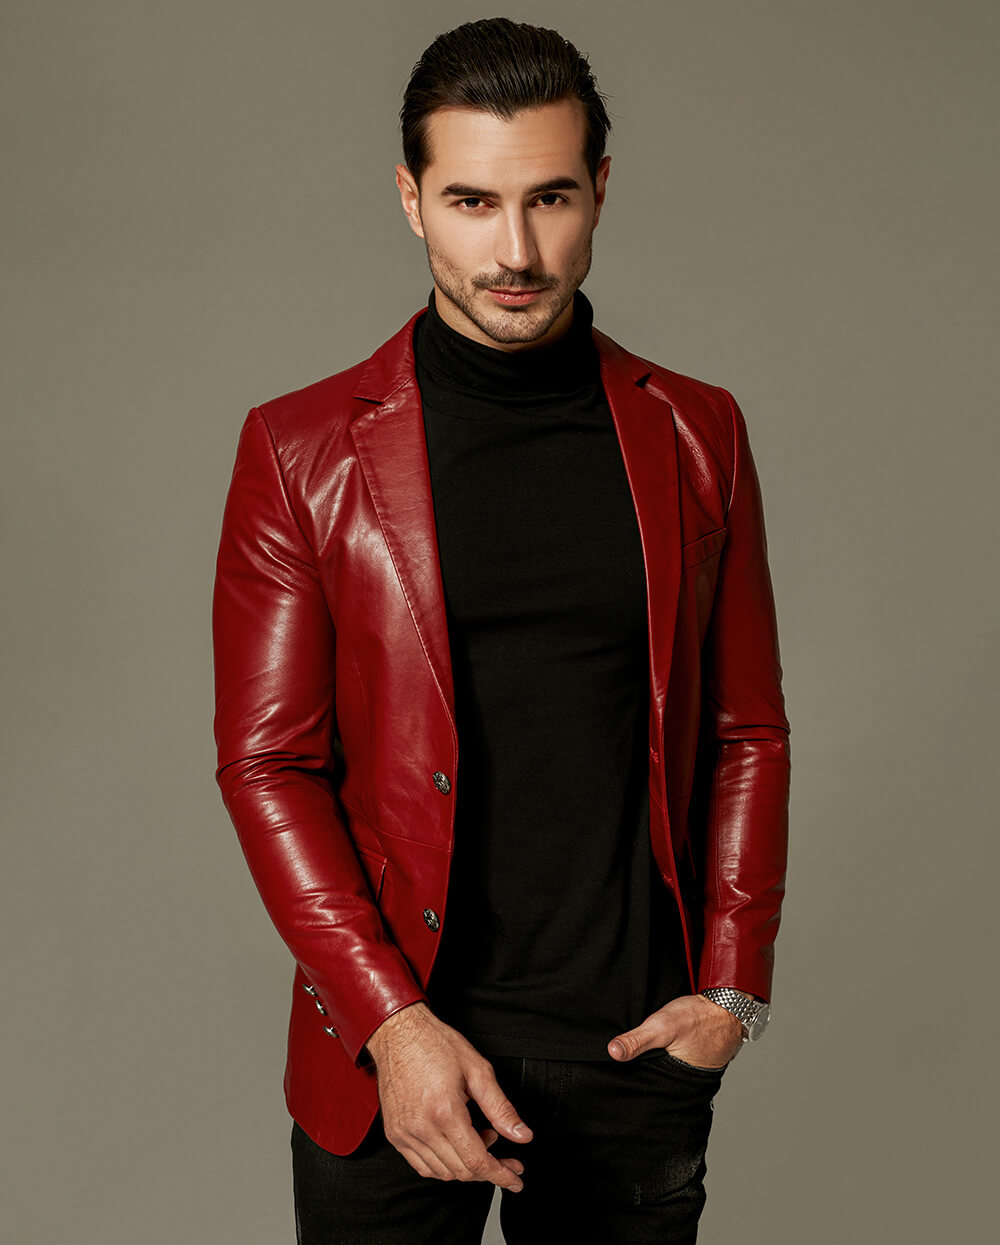 Red Bomber Jacket Outfits For Men (132 ideas & outfits)